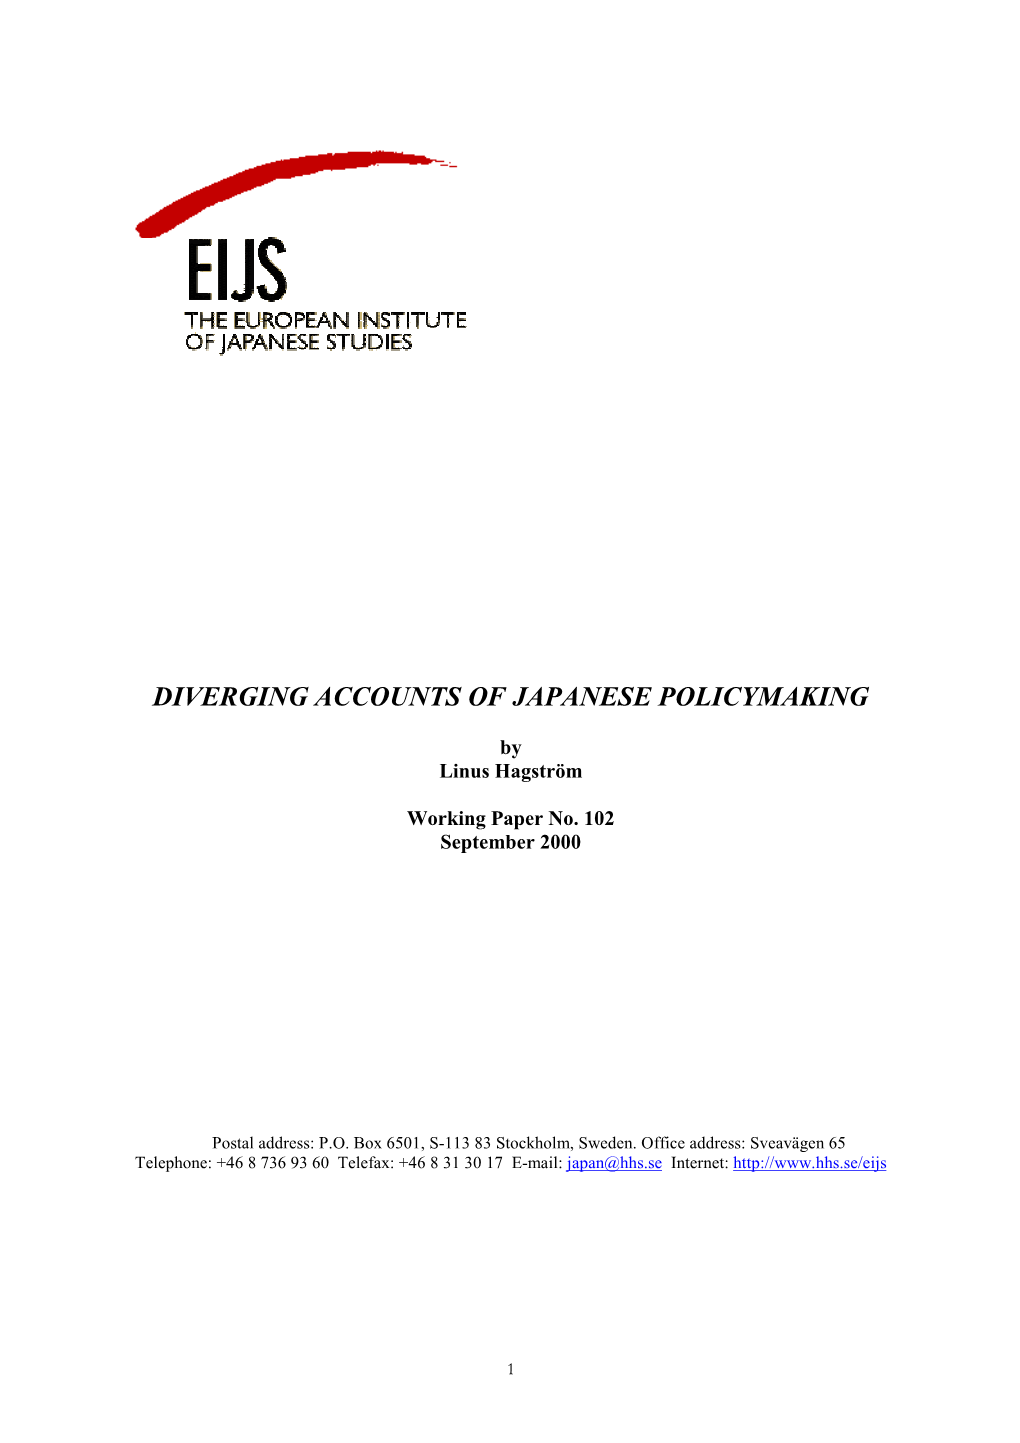 Diverging Accounts of Japanese Policymaking